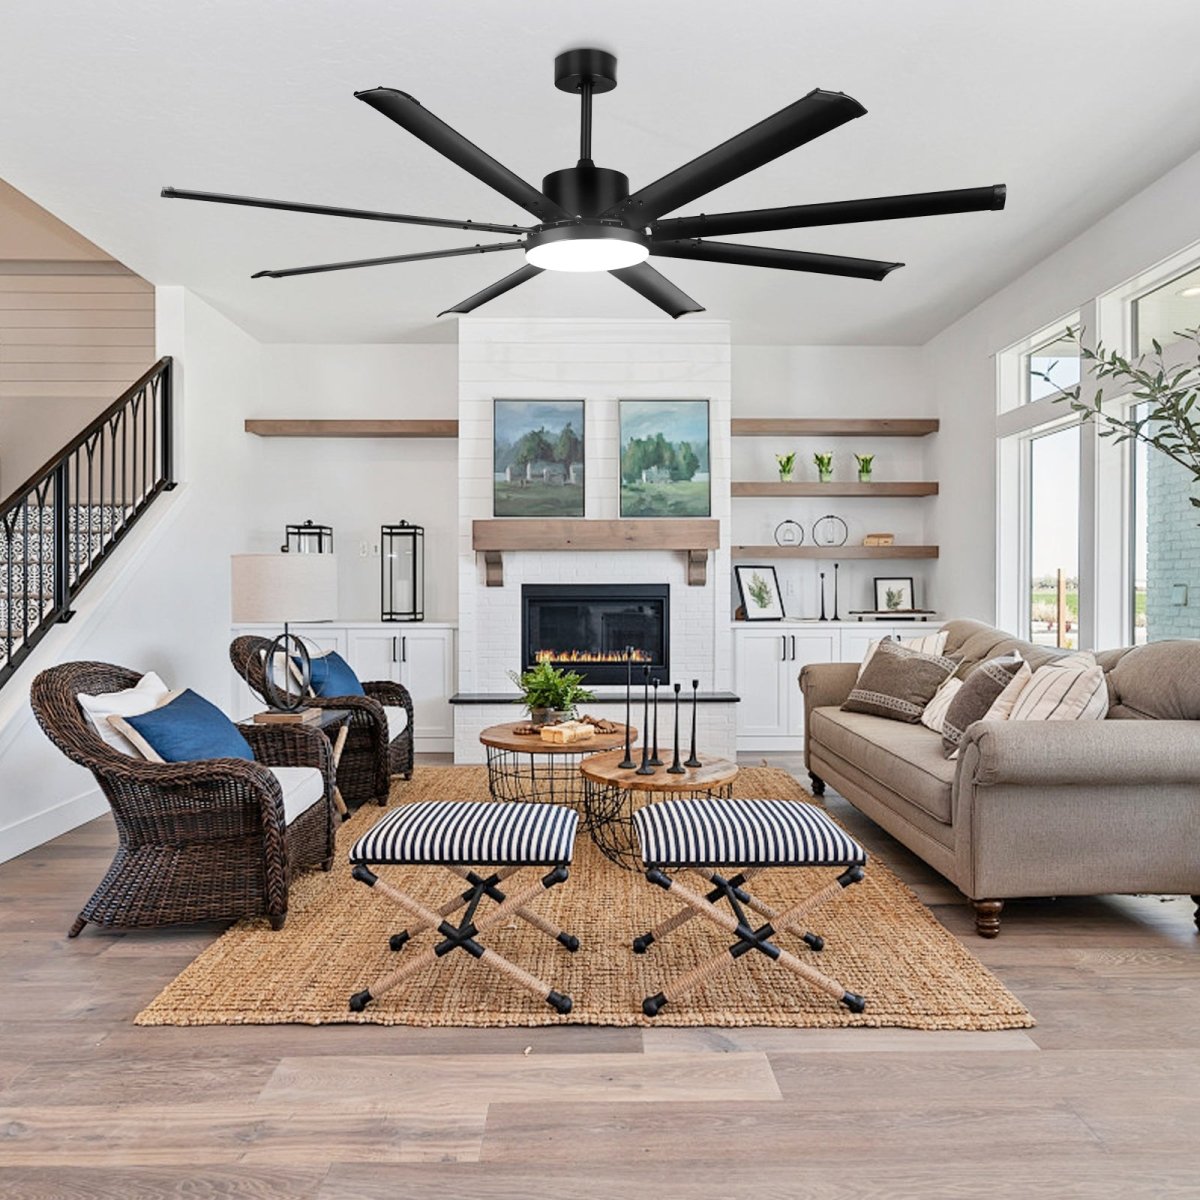 Depuley 80" Ceiling Fan With Lights and Remote, Large Black Ceiling Fans Quiet Reversible DC Motor 8 Aluminum Blades, Modern Ceiling Fan for Kitchen Living Room Patio, 6 Speed 3 CCT 3000K-6000K, Timer - WS-FPZ58-24C-8-B 5 | DEPULEY